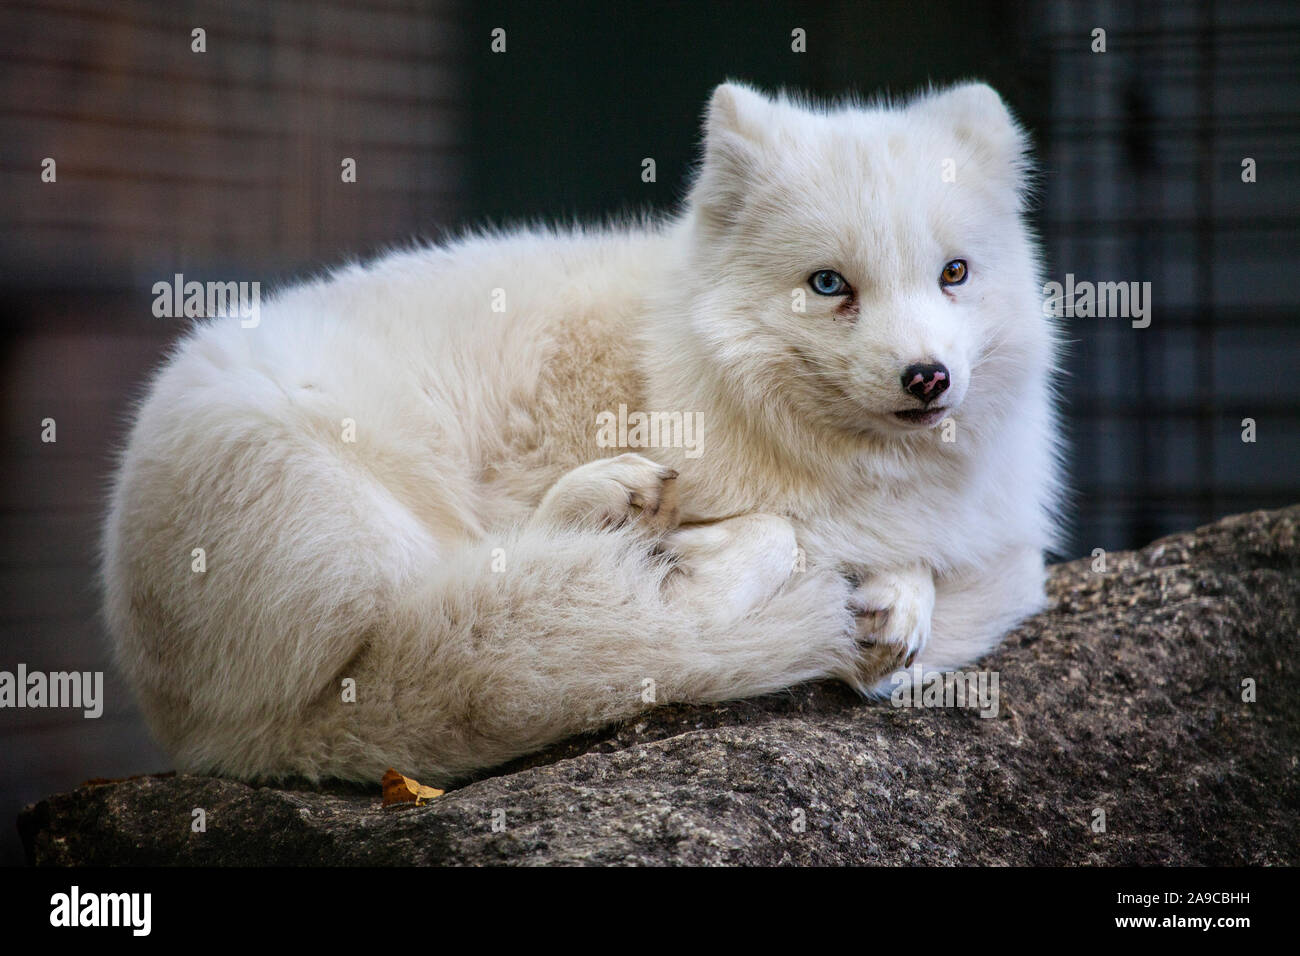 An Arctic Fox in captivity. Although not common within its species, this fox has Heterochromia which creates two different colored eyes. Stock Photo